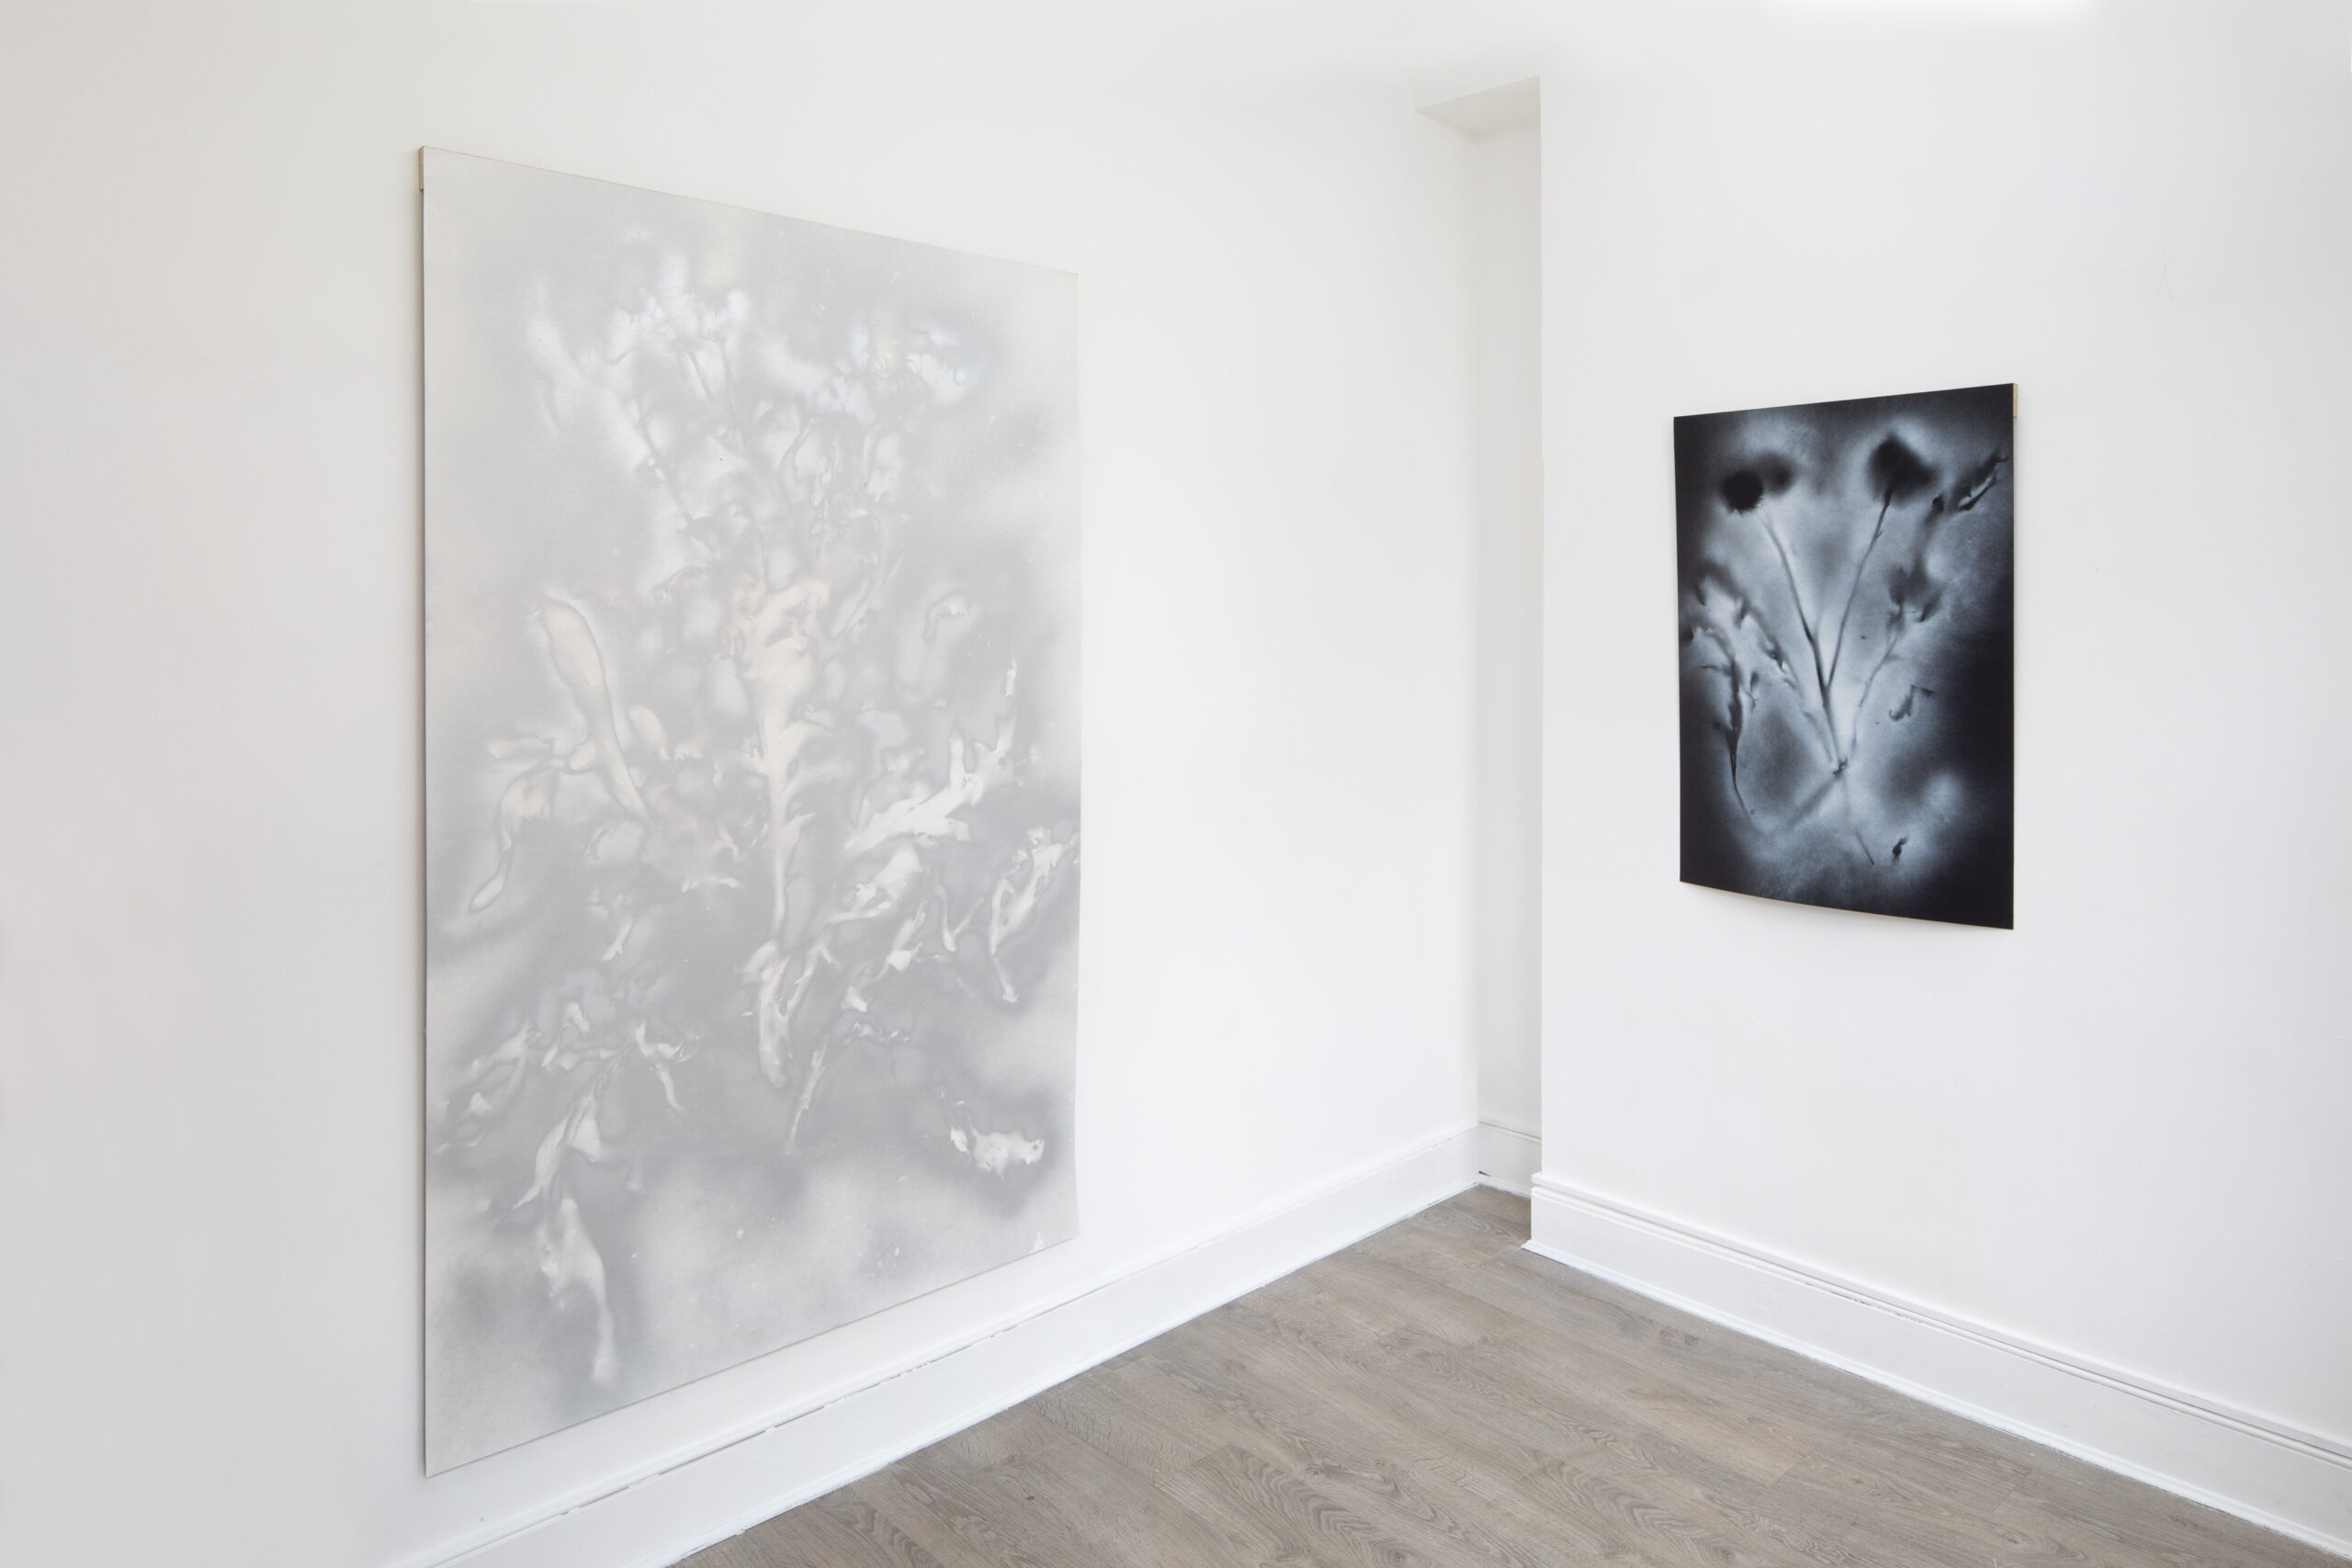 Exhibition view: William Mackrell 'Strip' at Lungley Gallery, London.